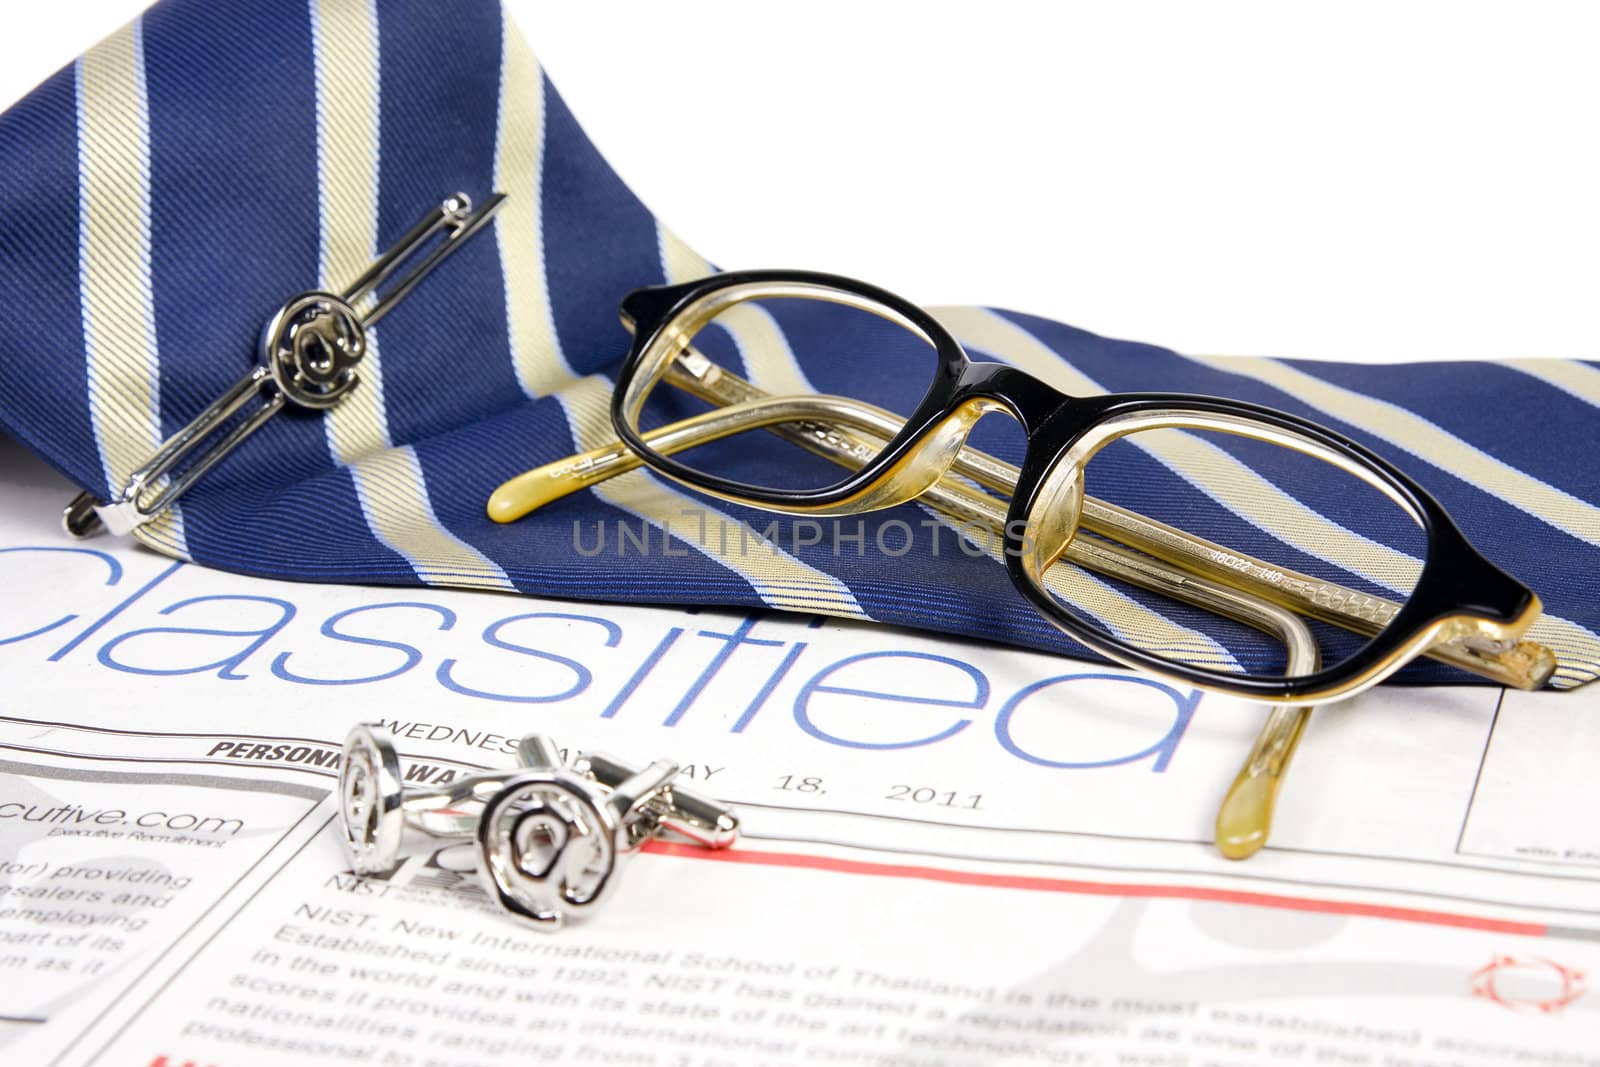 Jobs classified market on newspaper with ties tieclip cufflinks and glasses